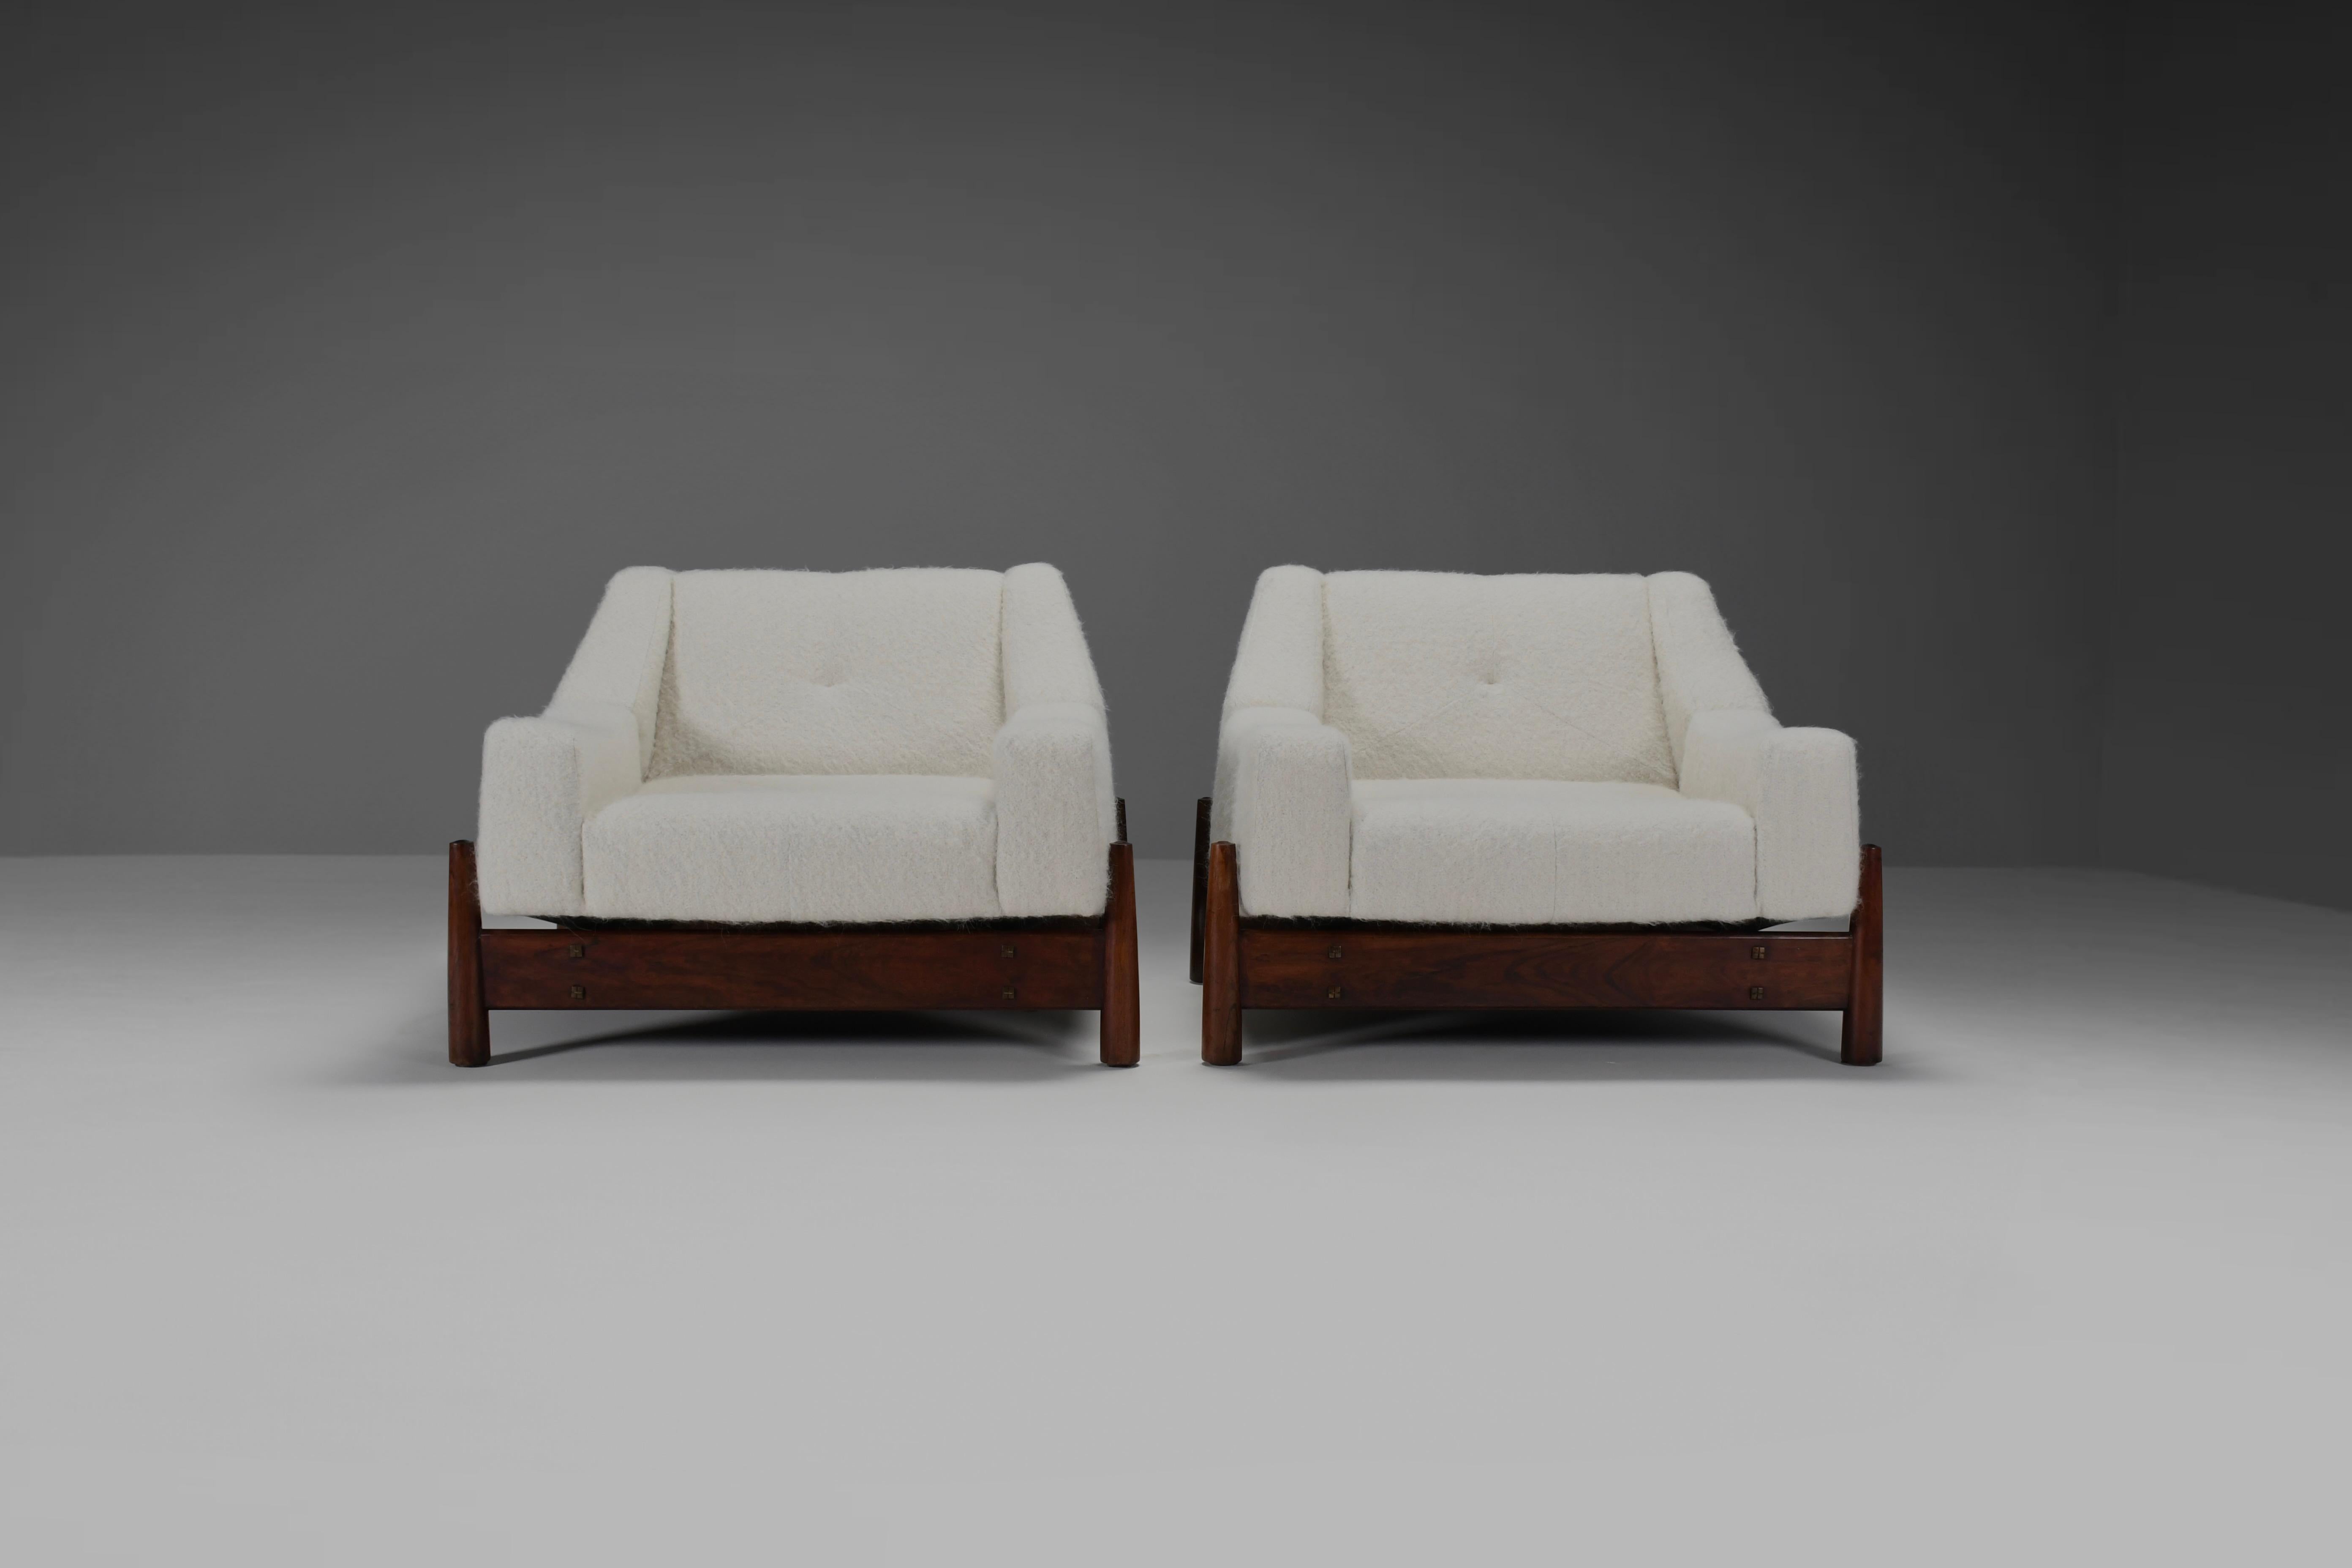 Exceptional Pair of Brazilian Lounge Chairs by Móveis Cimo, 1950s In Excellent Condition For Sale In Echt, NL